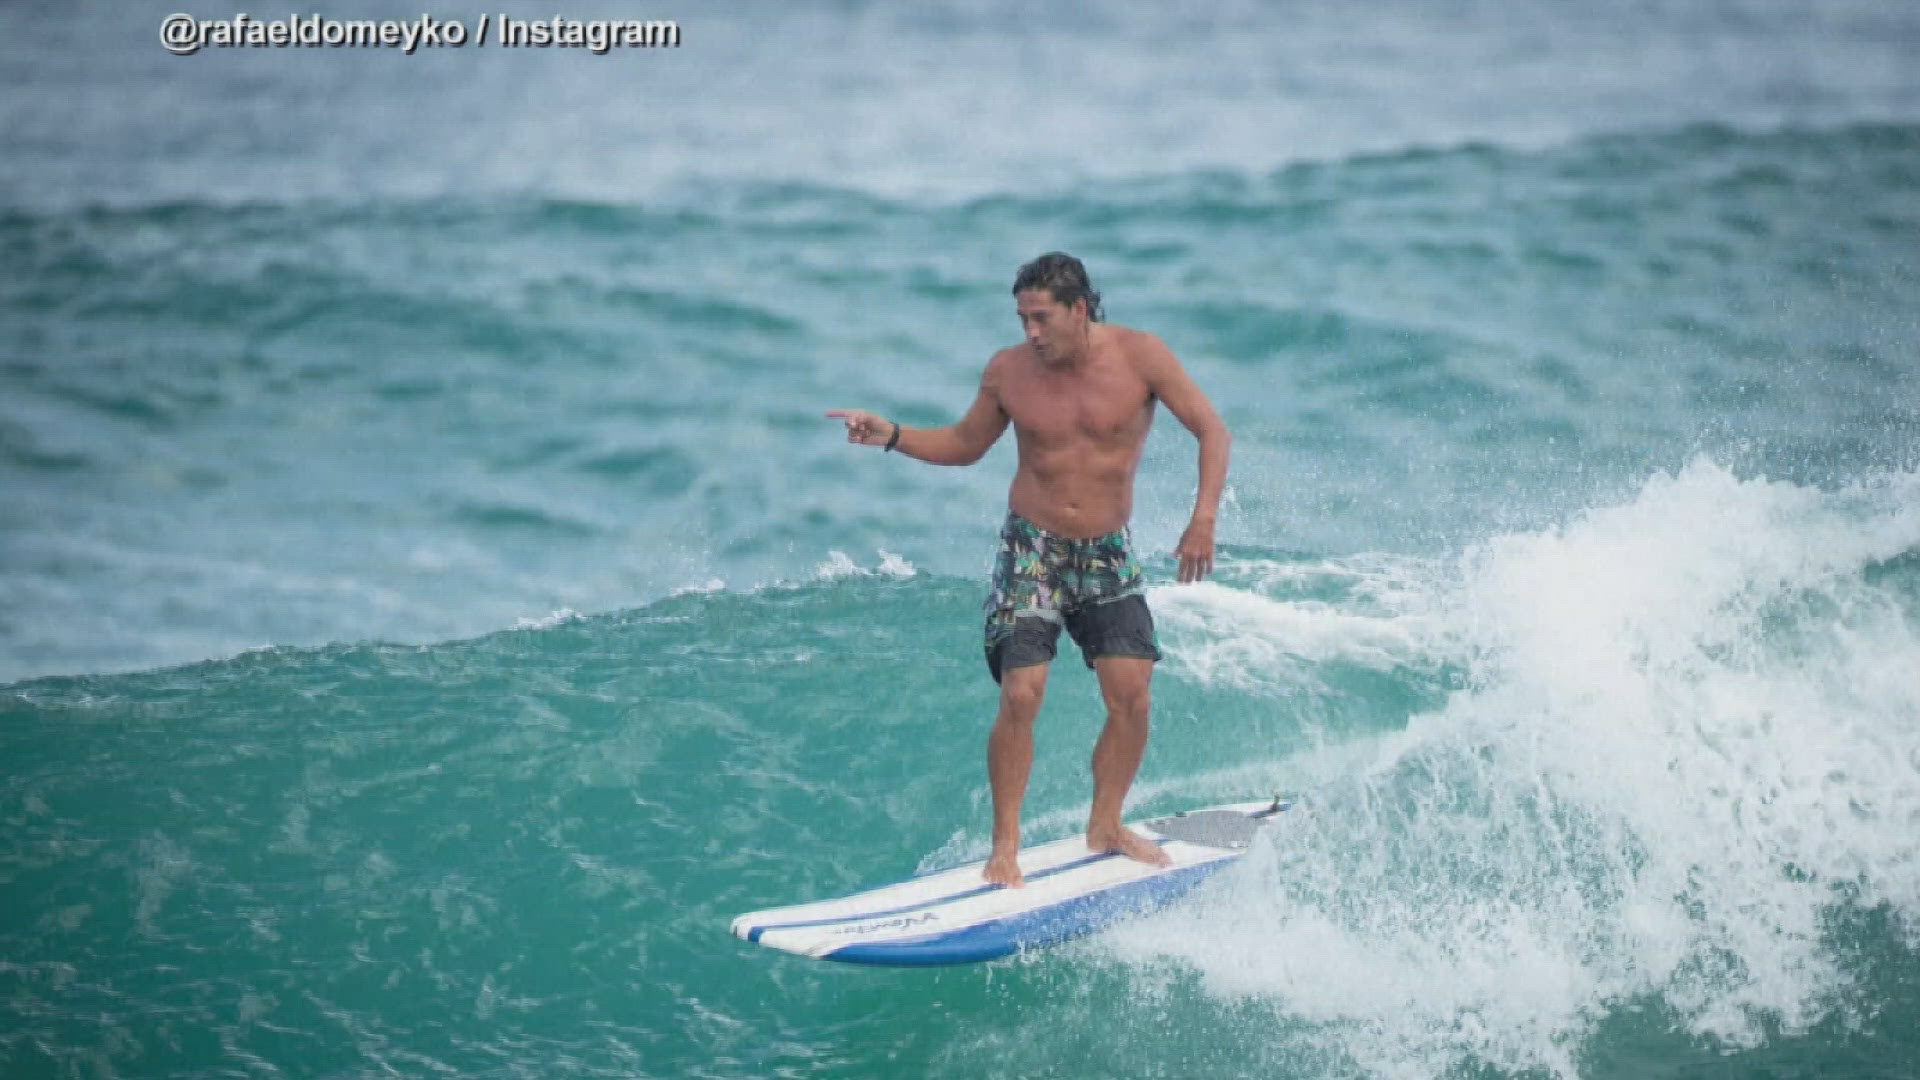 Honolulu officials called Tamayo Perry “a lifeguard loved by all.”